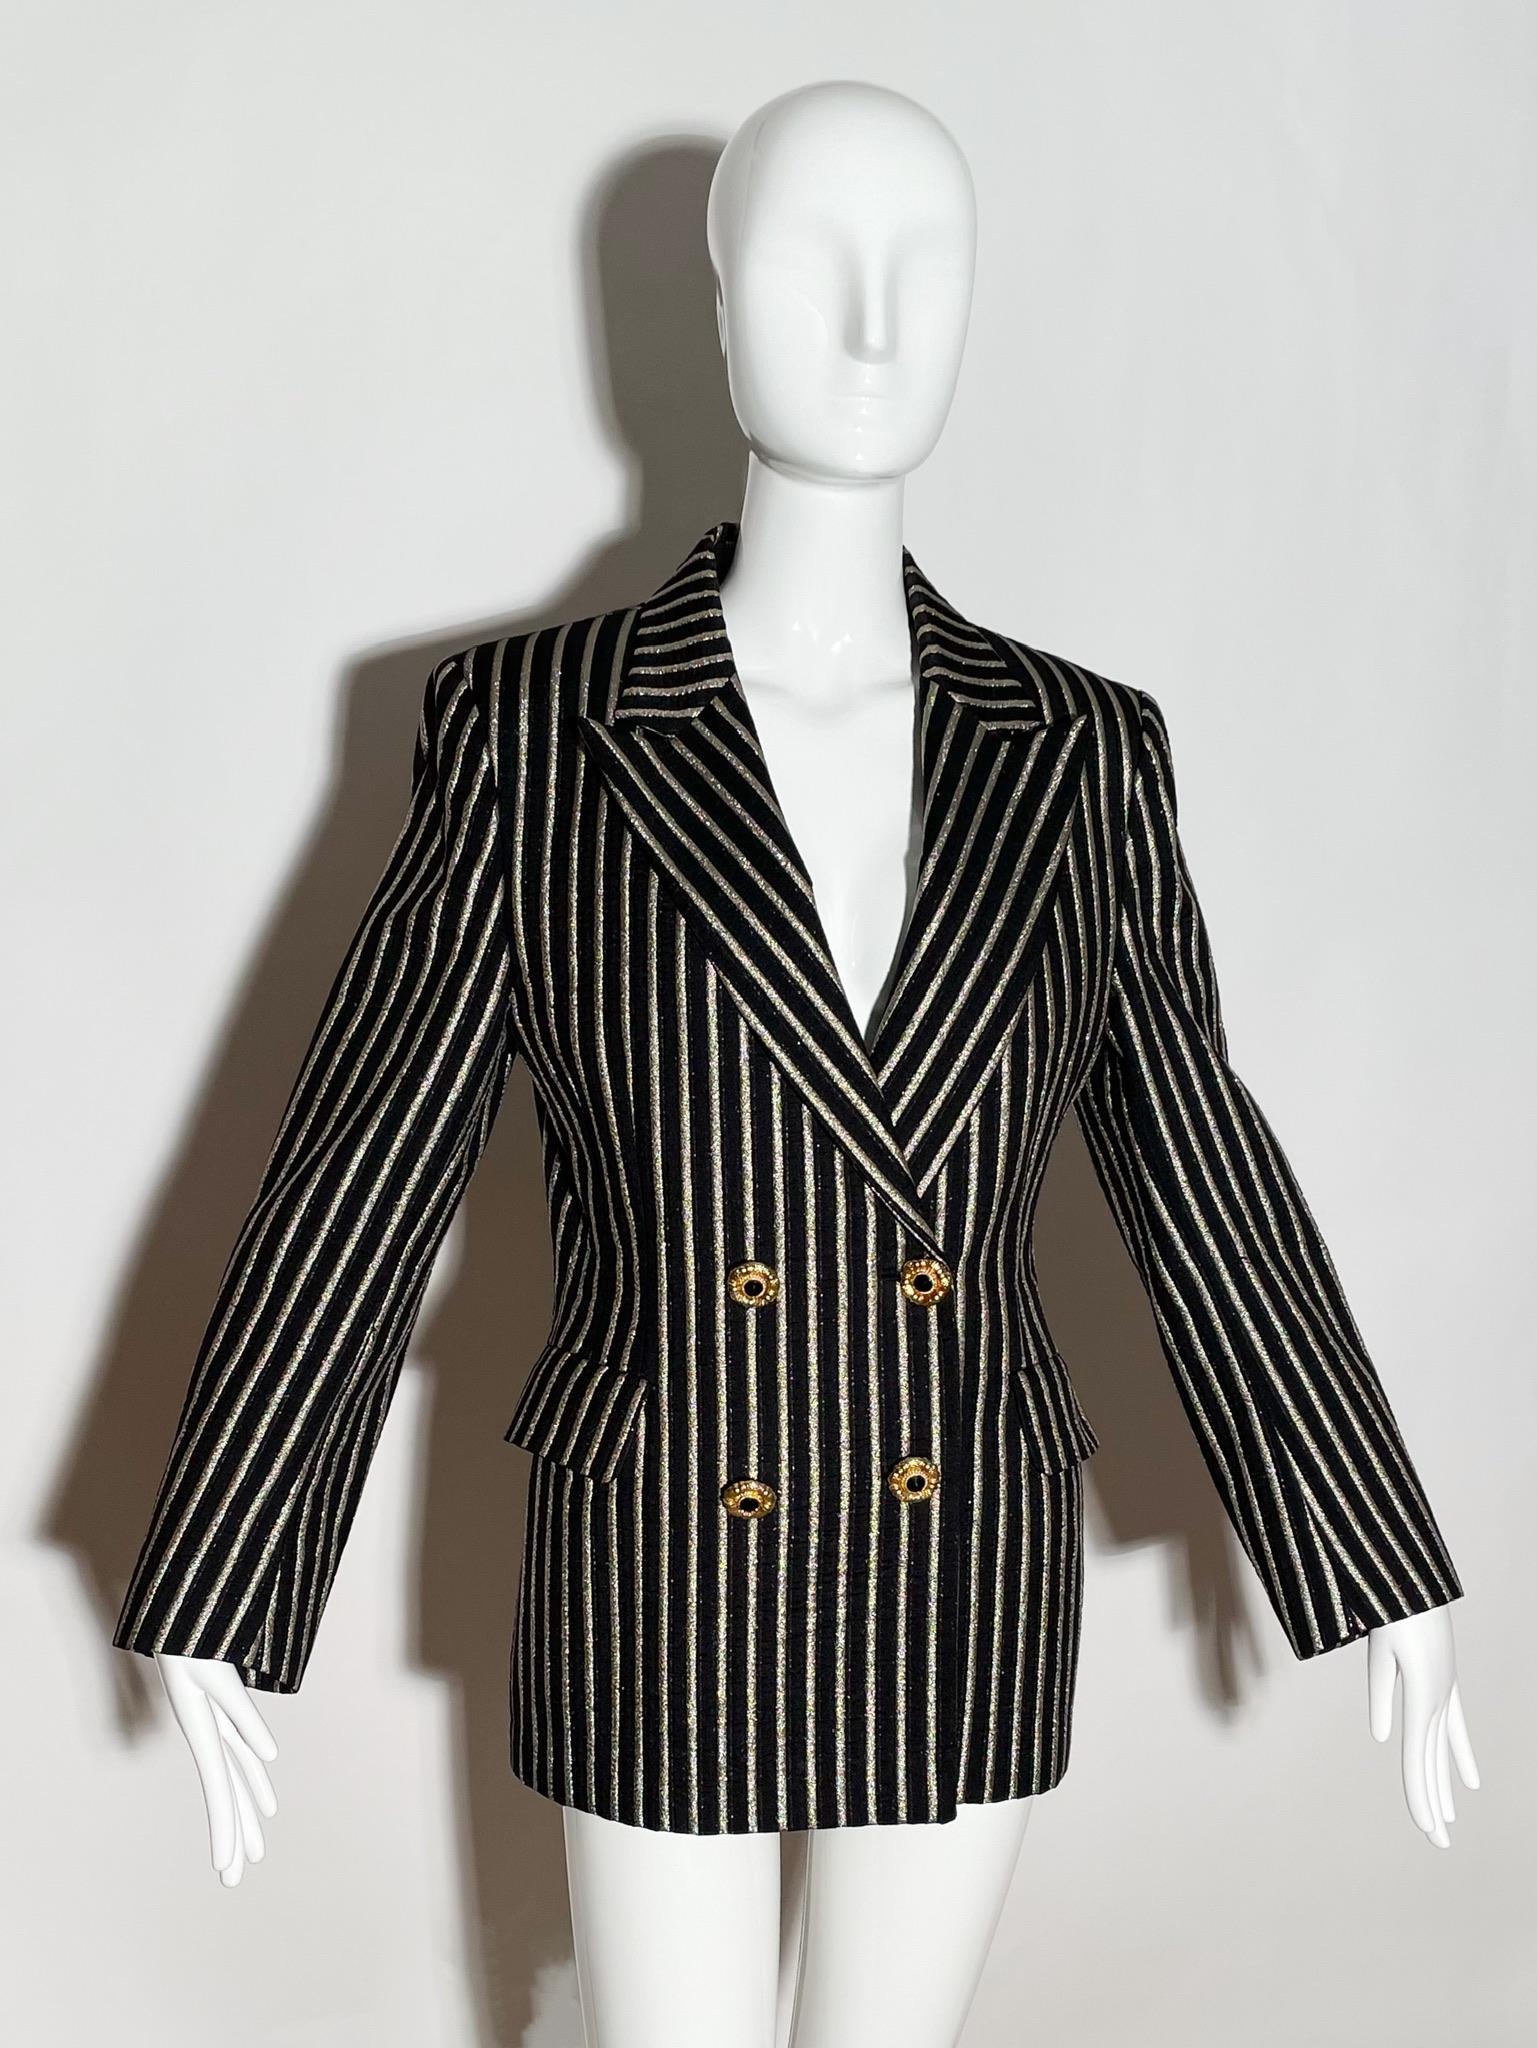 Black and metallic pin stripe blazer. Lapel. Front pockets. Gold Buttons. Made in Italy. 

*Condition: Excellent vintage condition. No visible Flaws.

Measurements Taken Laying Flat (inches)—
Shoulder to Shoulder: 16 in.
Sleeve Length: 23.5